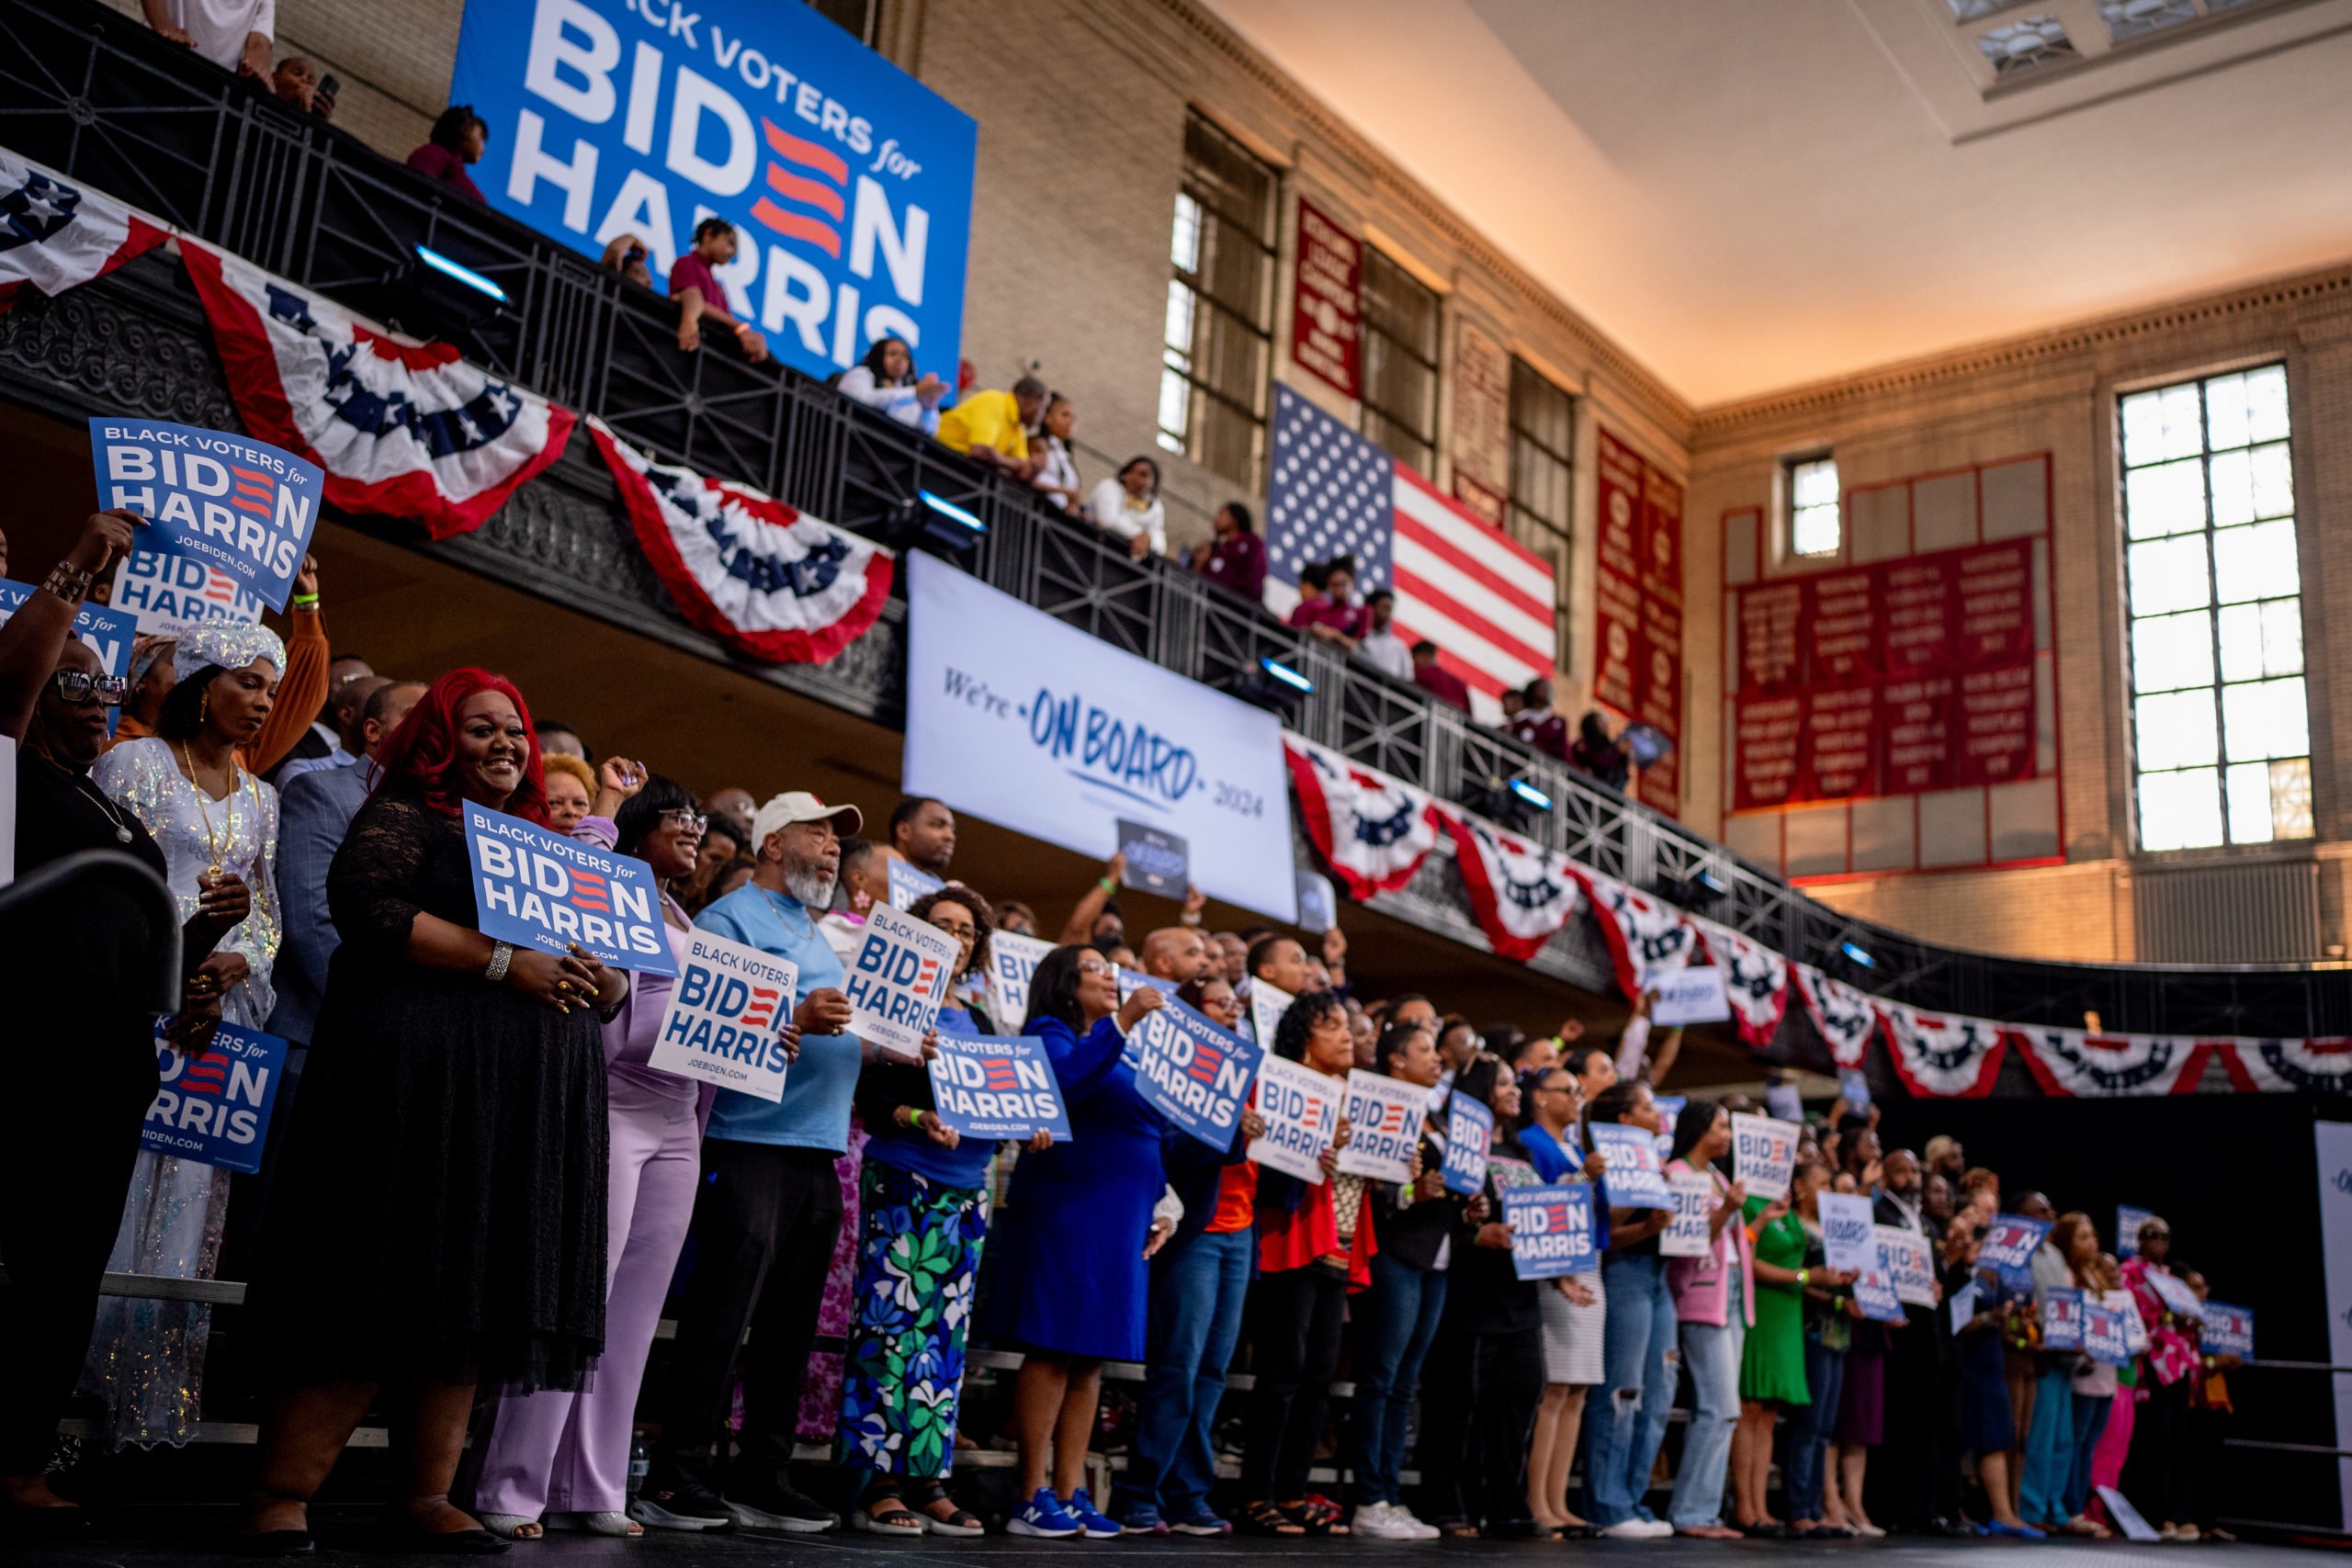 Members of the audience cheer as U.S. President Joe Biden speaks during a campaign rally at Girard College on May 29, 2024 in Philadelphia, Pennsylvania. Biden and U.S. Vice President Kamala Harris are using today's rally to launch a nationwide campaign to court black voters, a group that has traditionally come out in favor of Biden, but their support is projected lower than it was in 2020. (Photo by Andrew Harnik/Getty Images)